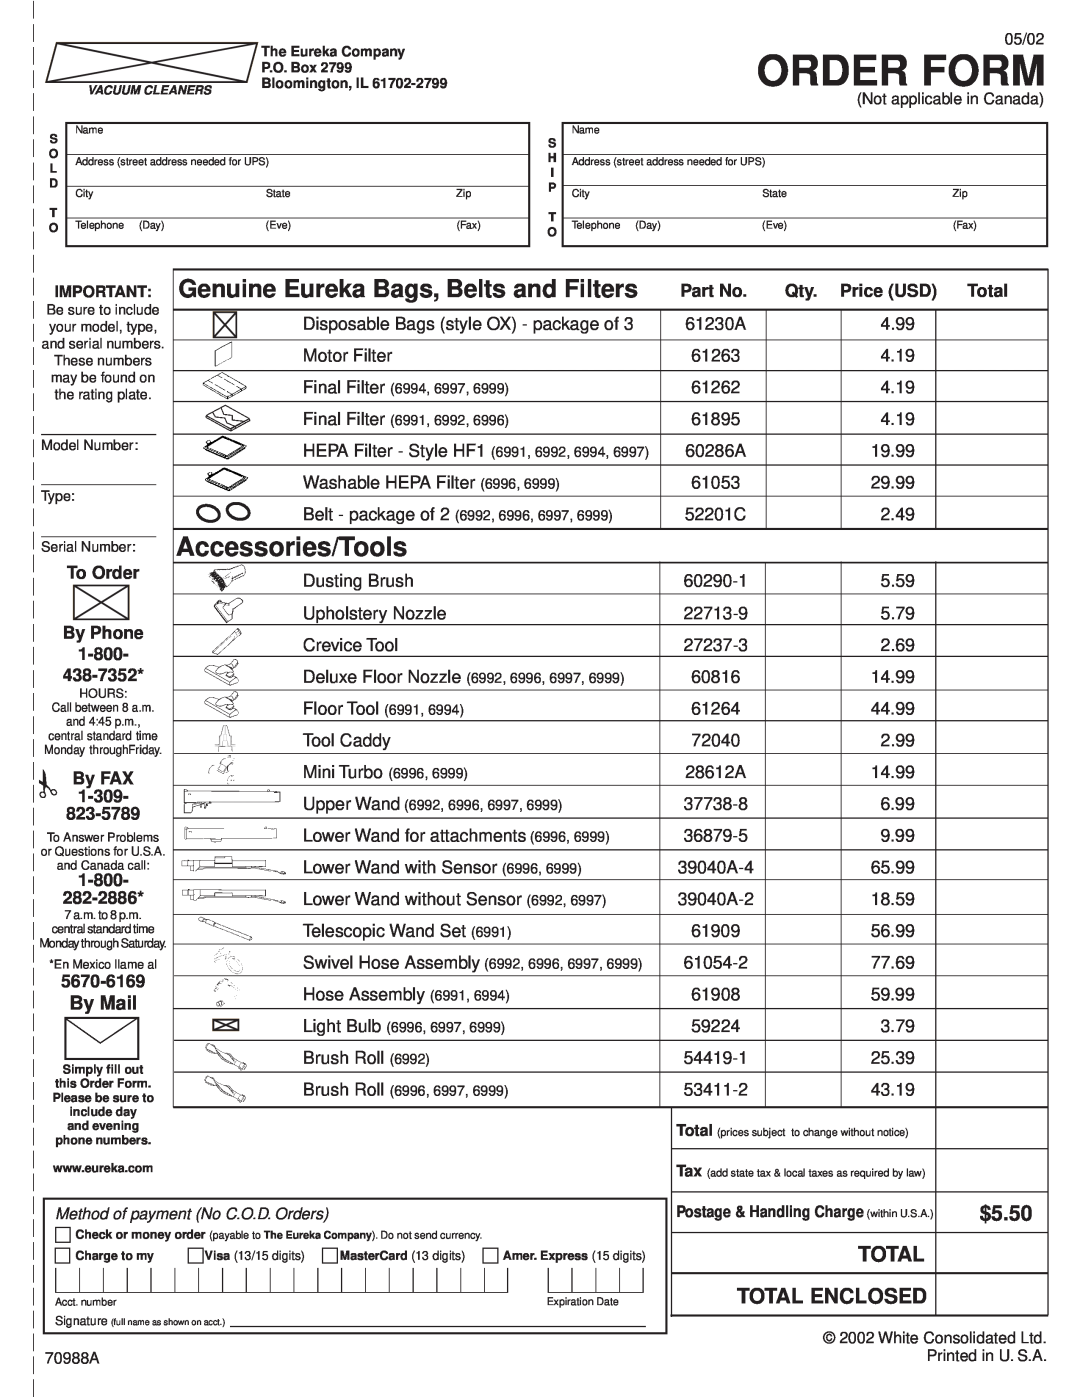 Eureka 6992 Order Form, Genuine Eureka Bags, Belts and Filters, $5.50, Total Enclosed, Qty. Price USD, By Phone, 1-800 